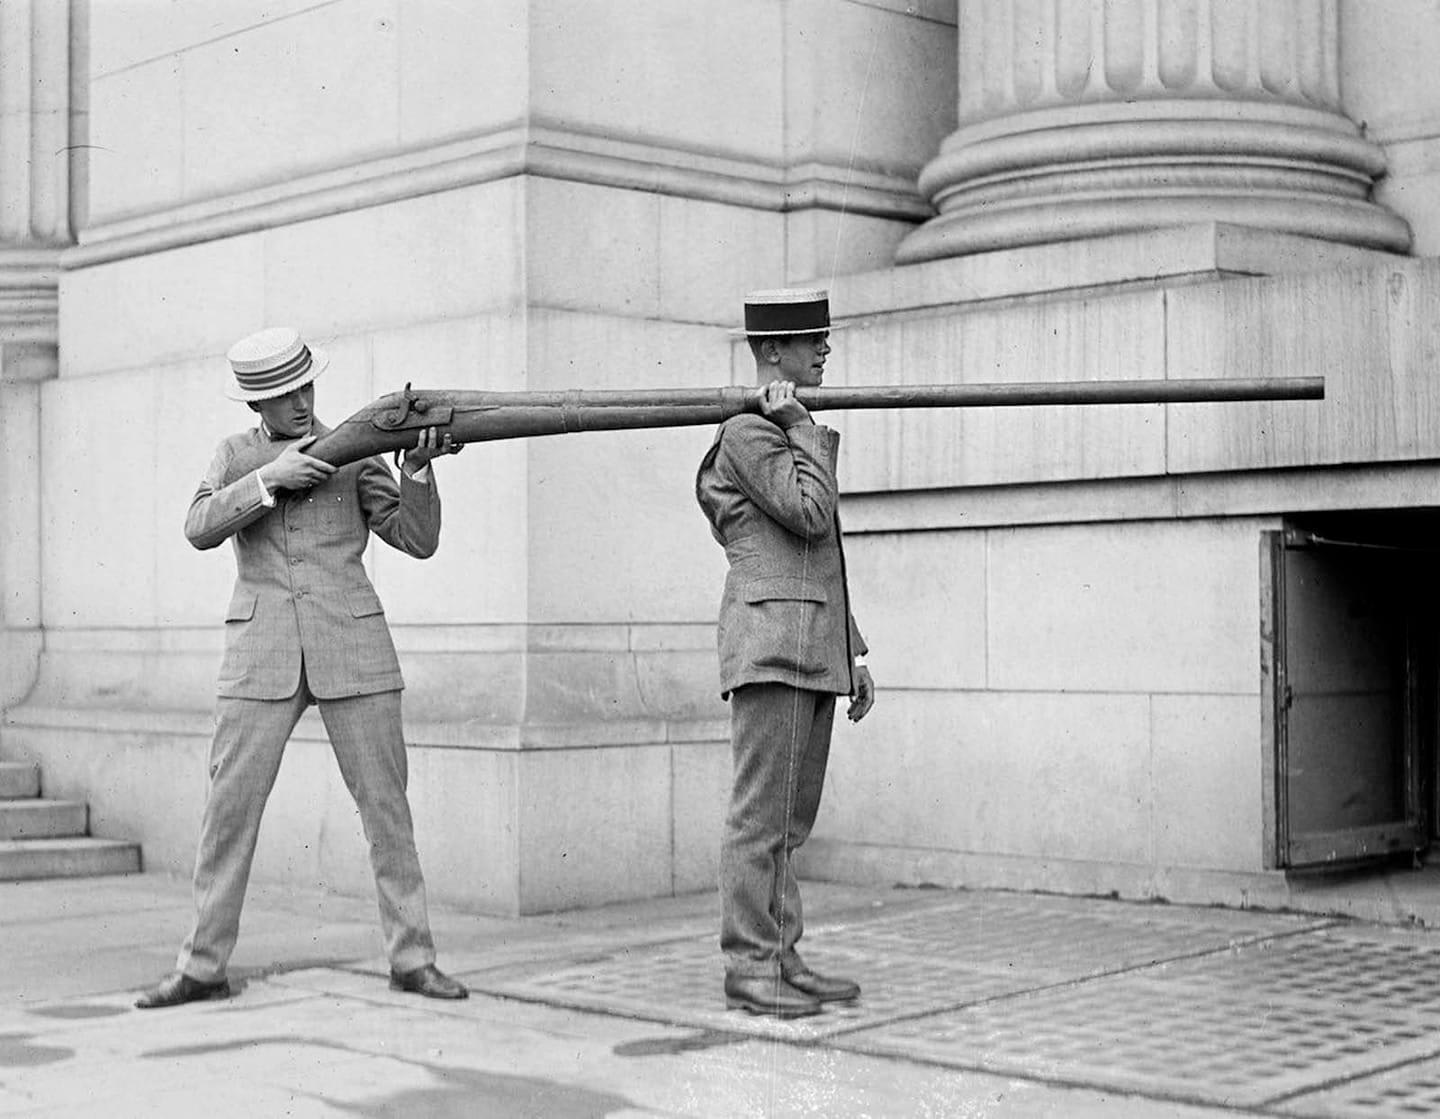 A Punt Gun is a type of extremely large shotgun used in the 19th and early 20th centuries for shooting large numbers of waterfowl for commercial harvesting operations and private sport.